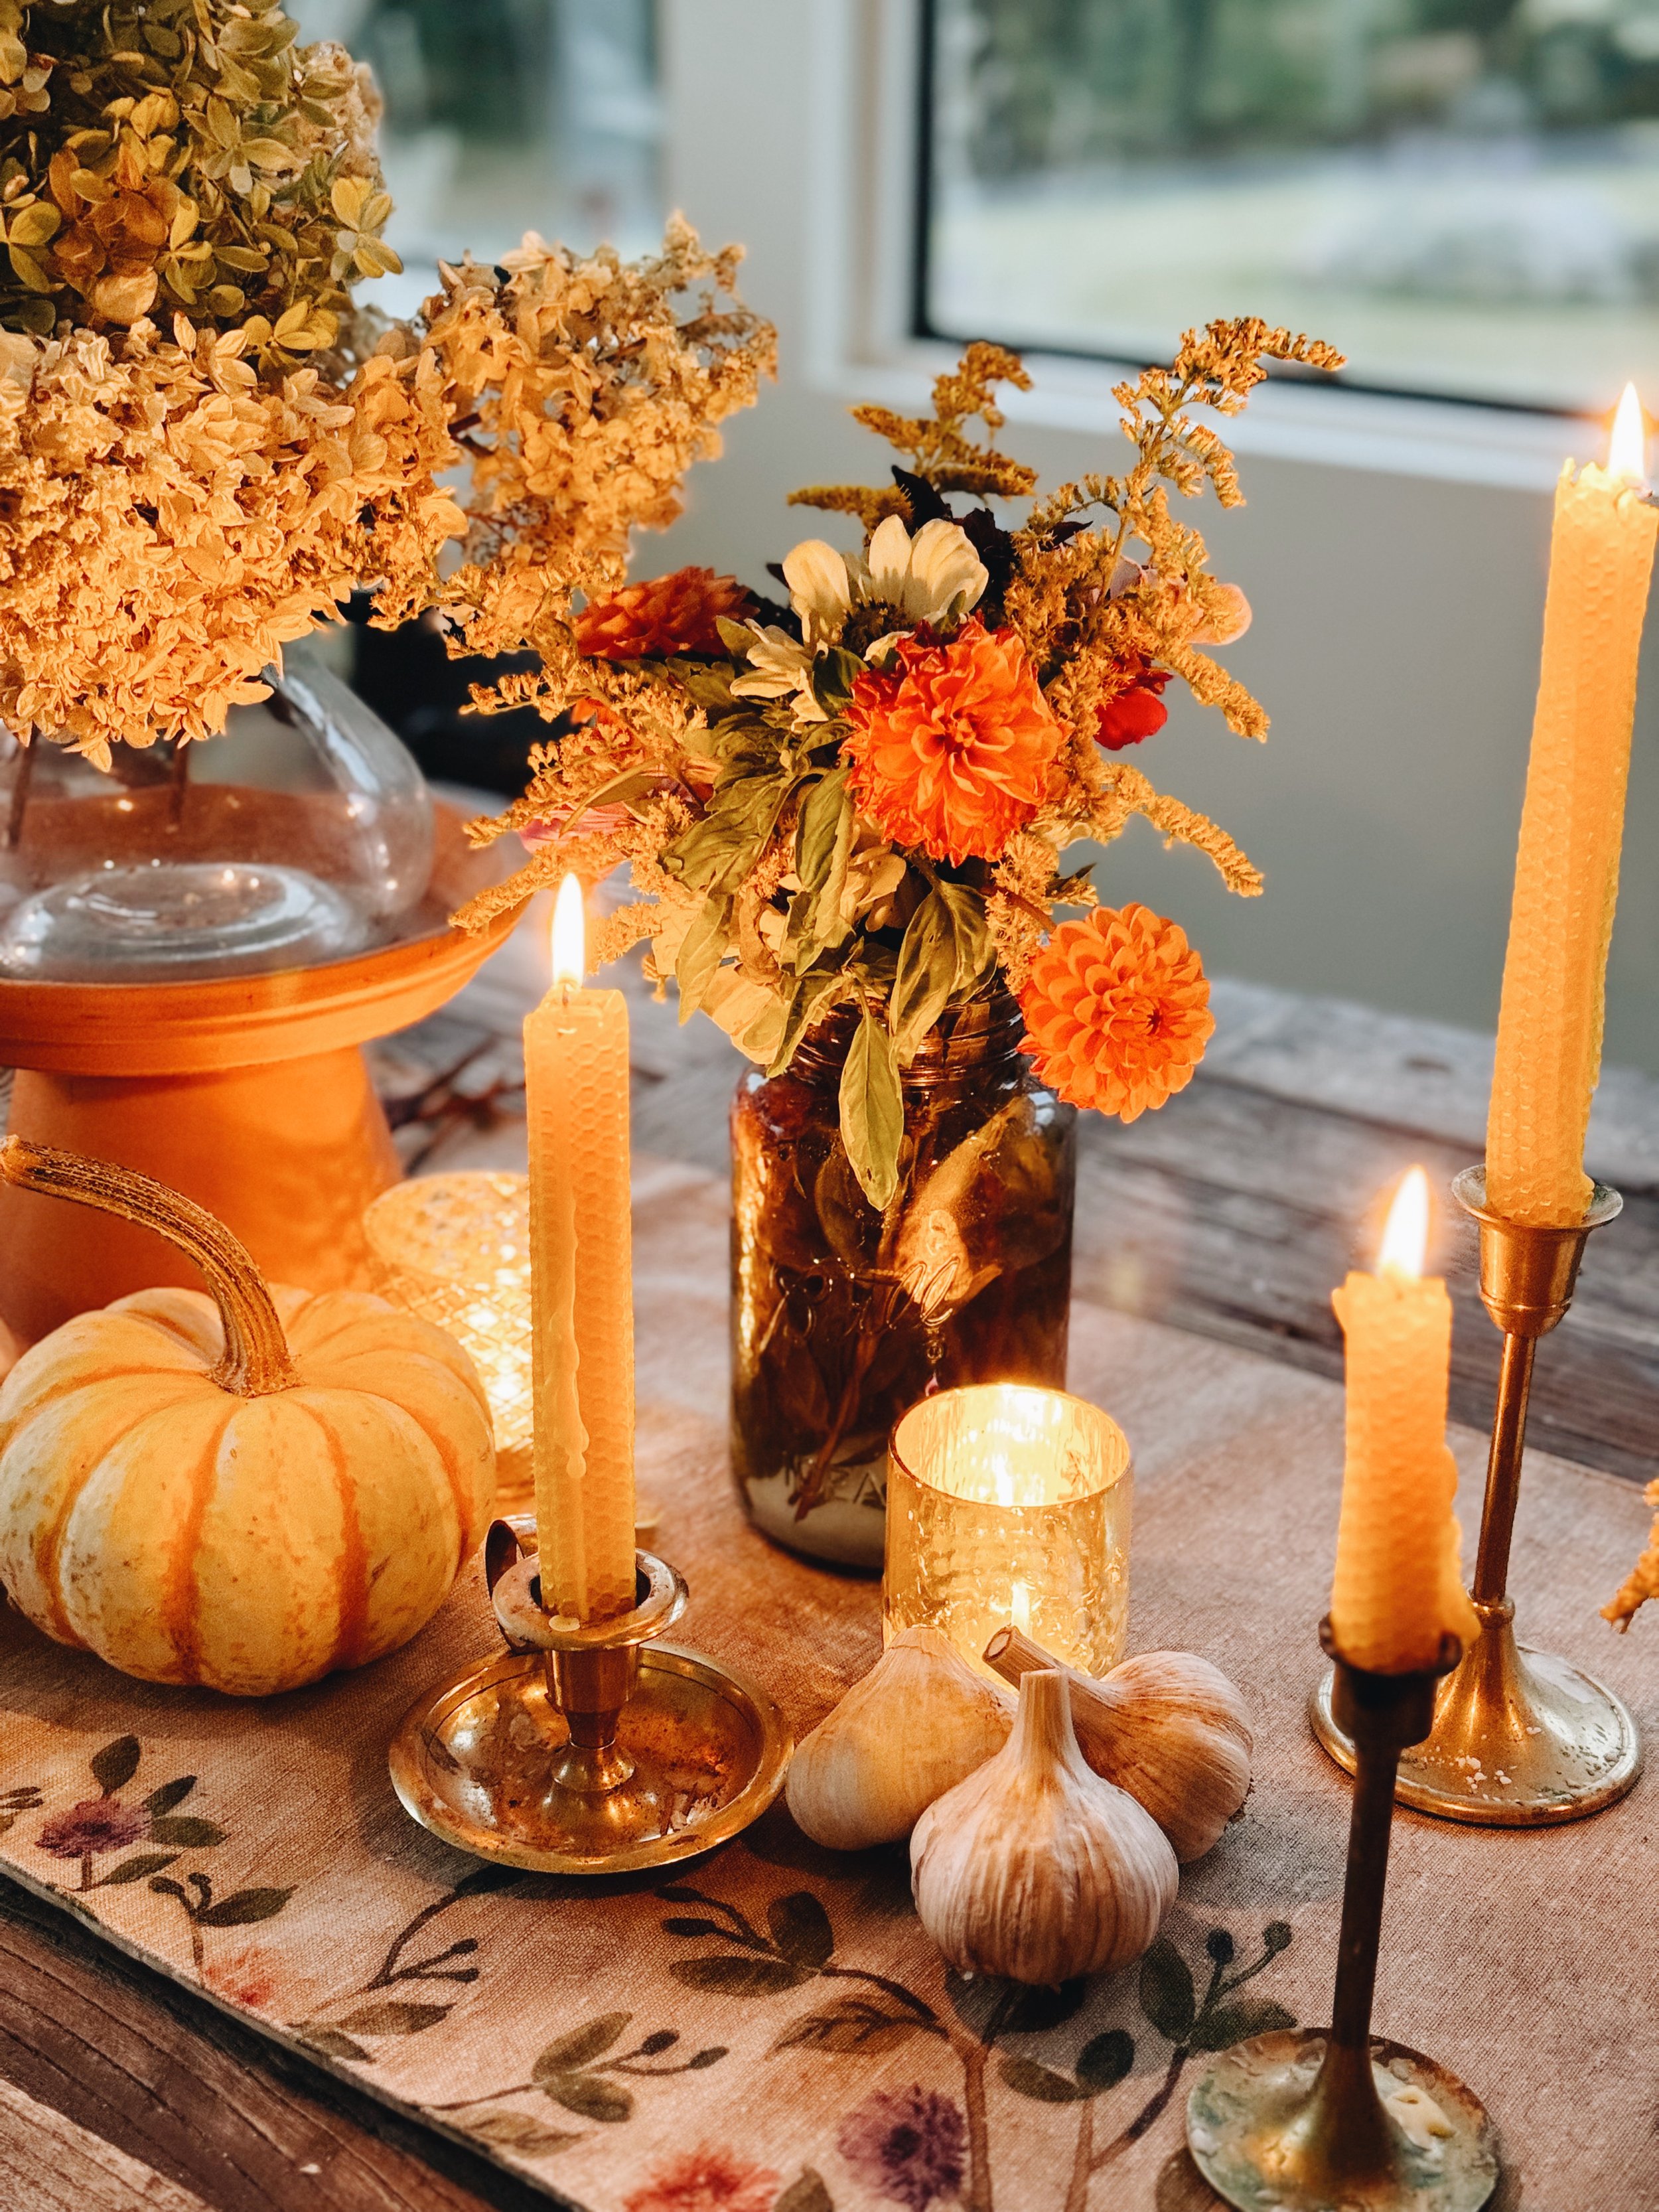 Create A Cozy Fall Ambiance By Making Your Own Beeswax Candles - Azure Farm